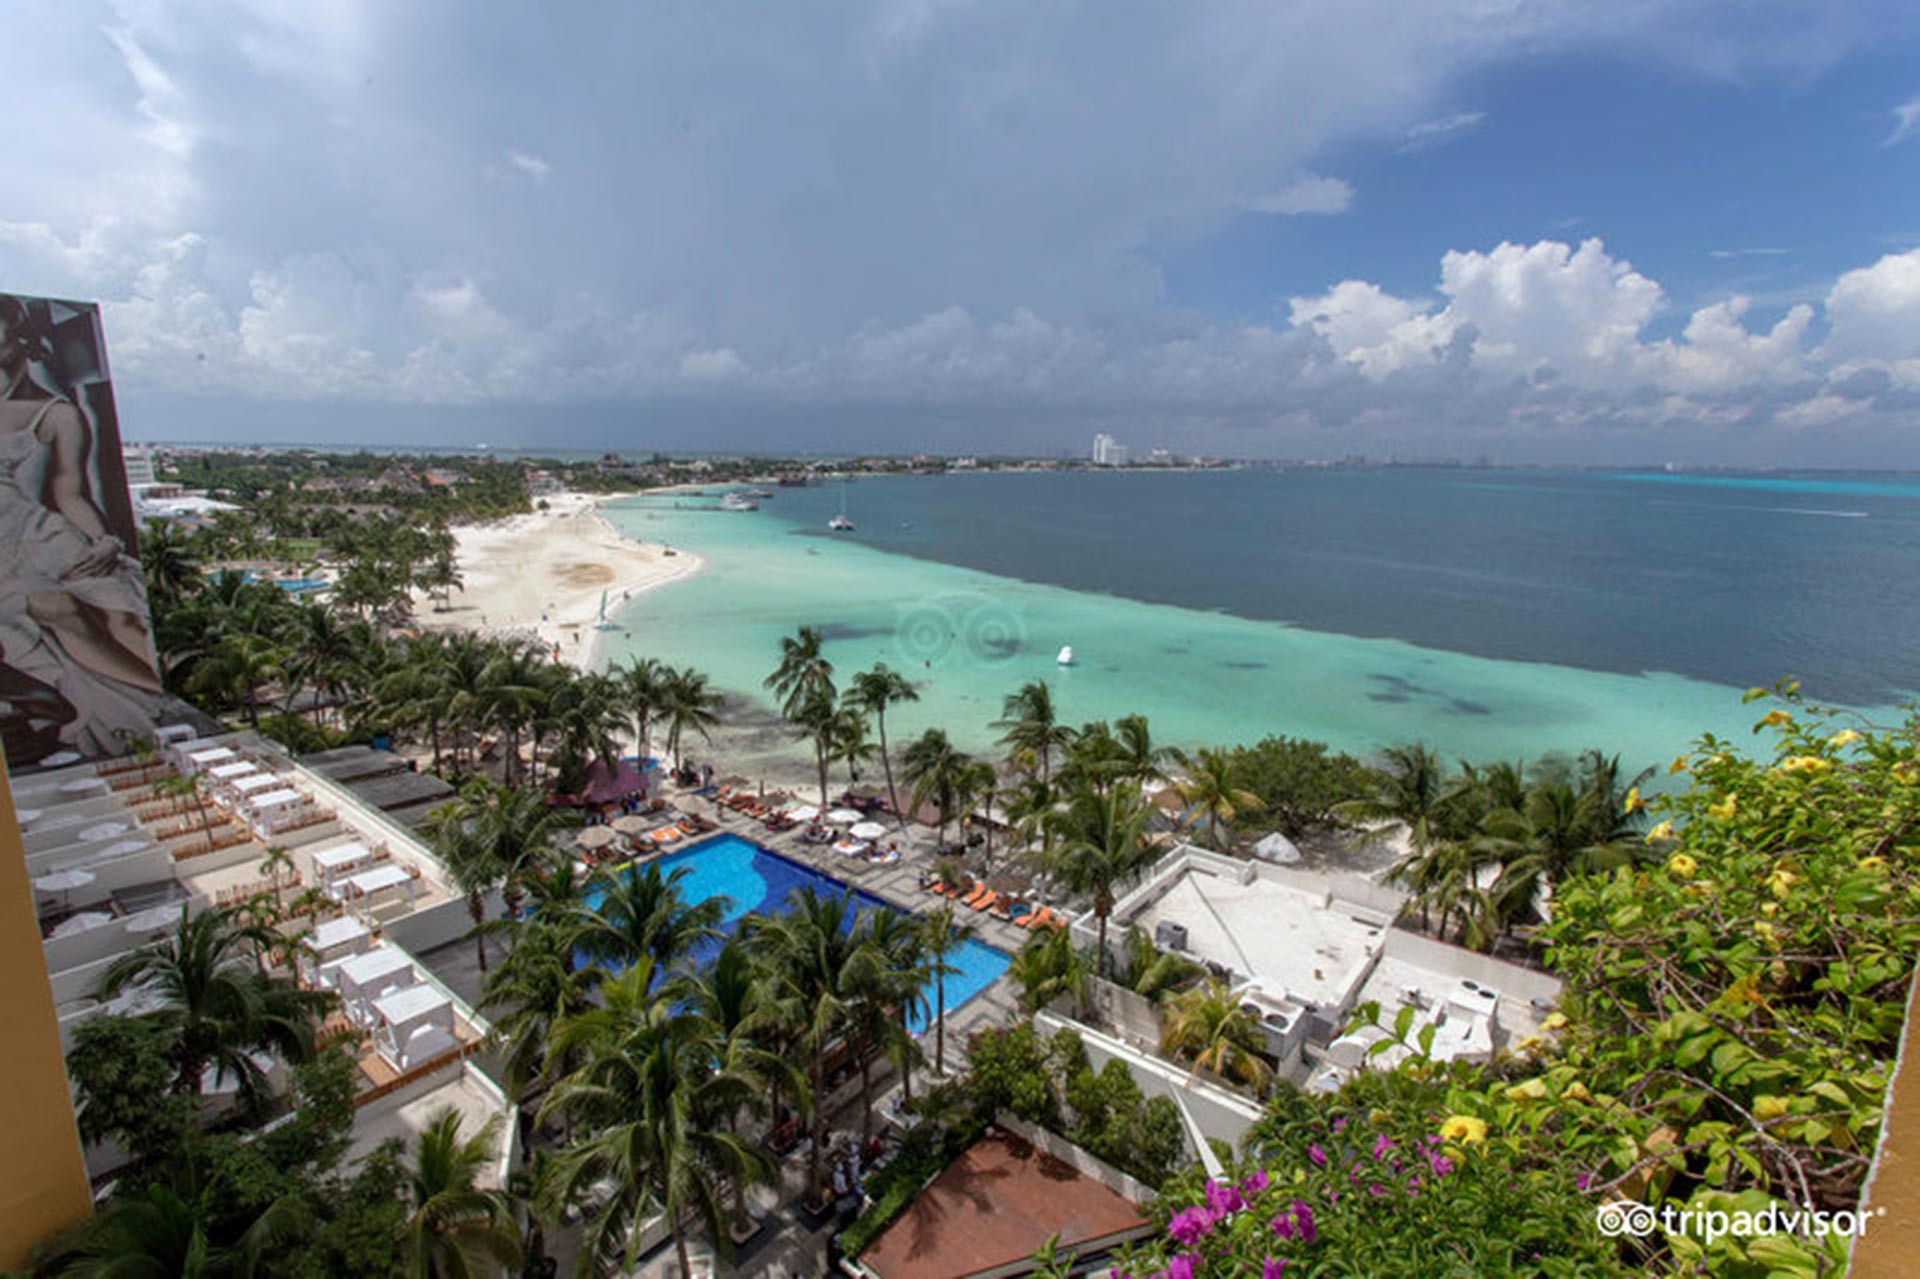 Dreams Sands Cancun in Mexico.